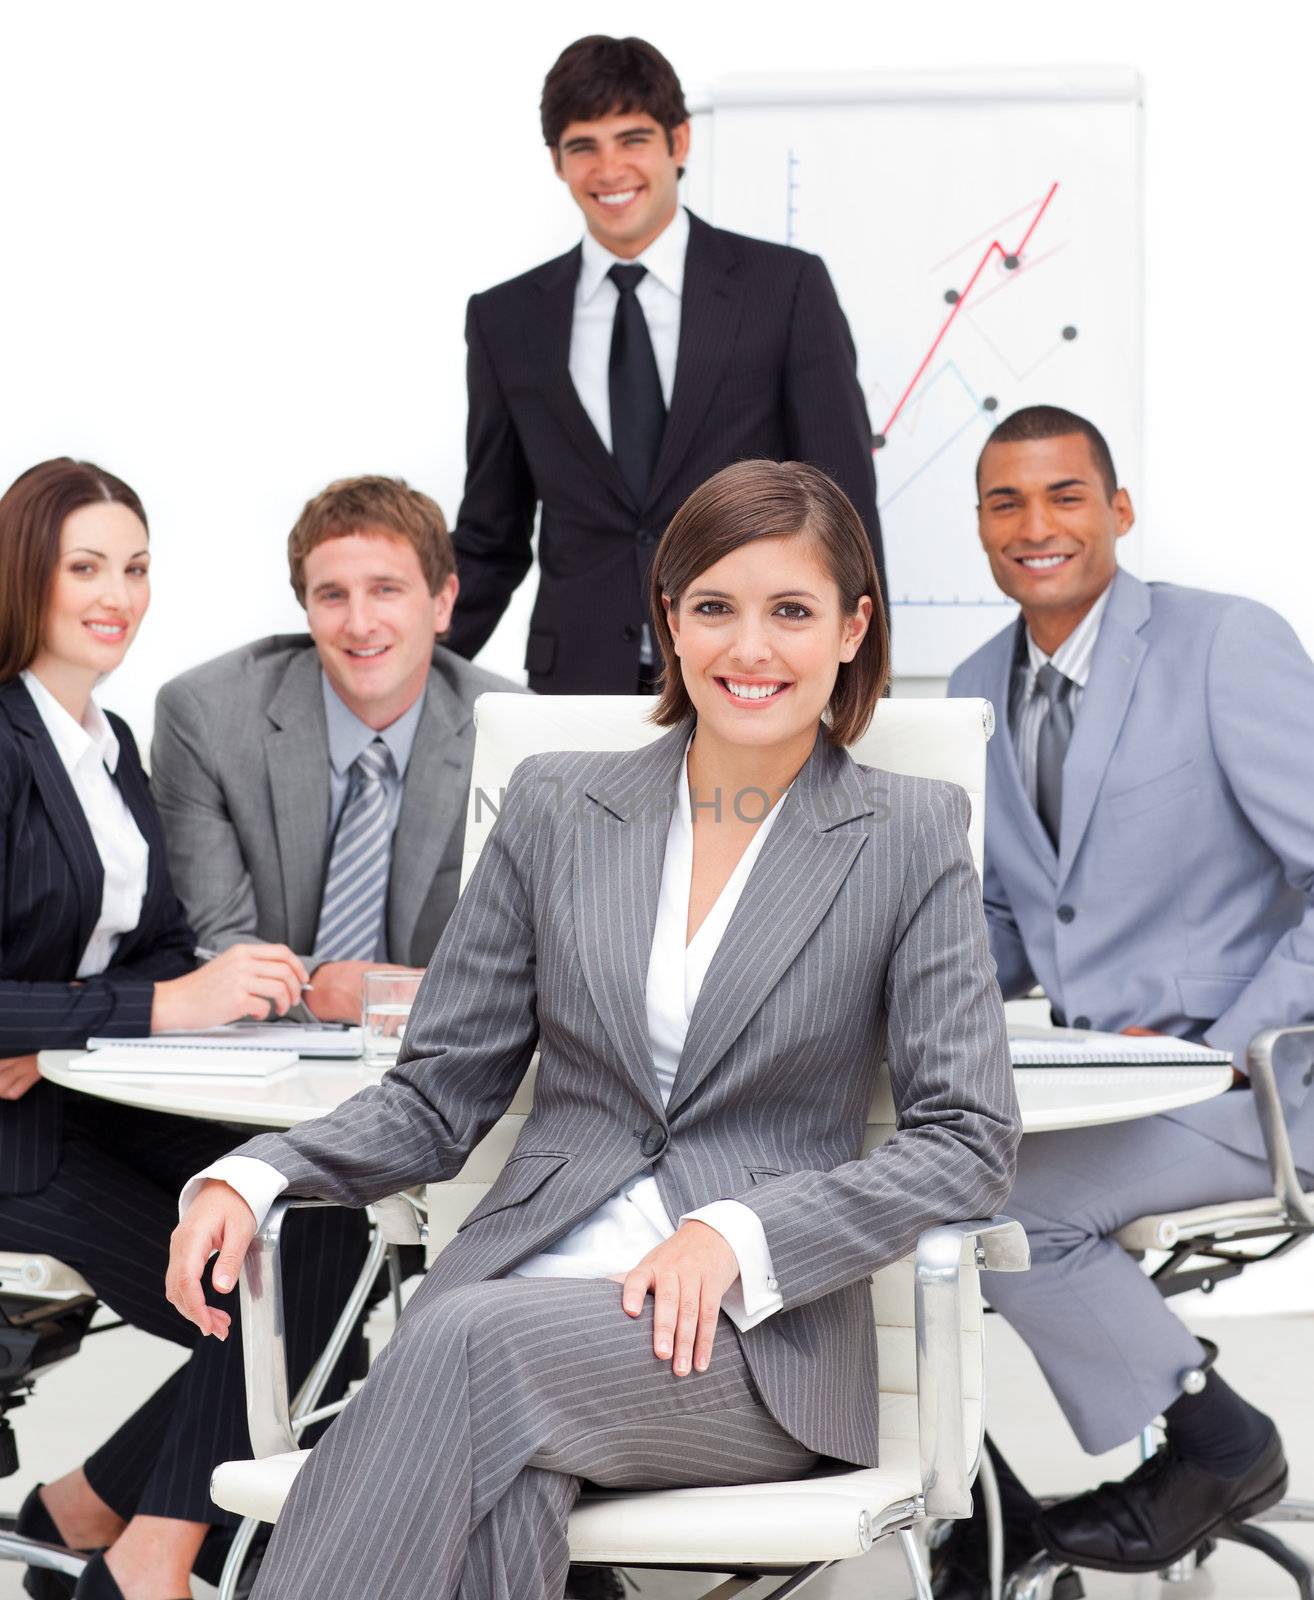 Assertive female executive sitting in front of her team by Wavebreakmedia